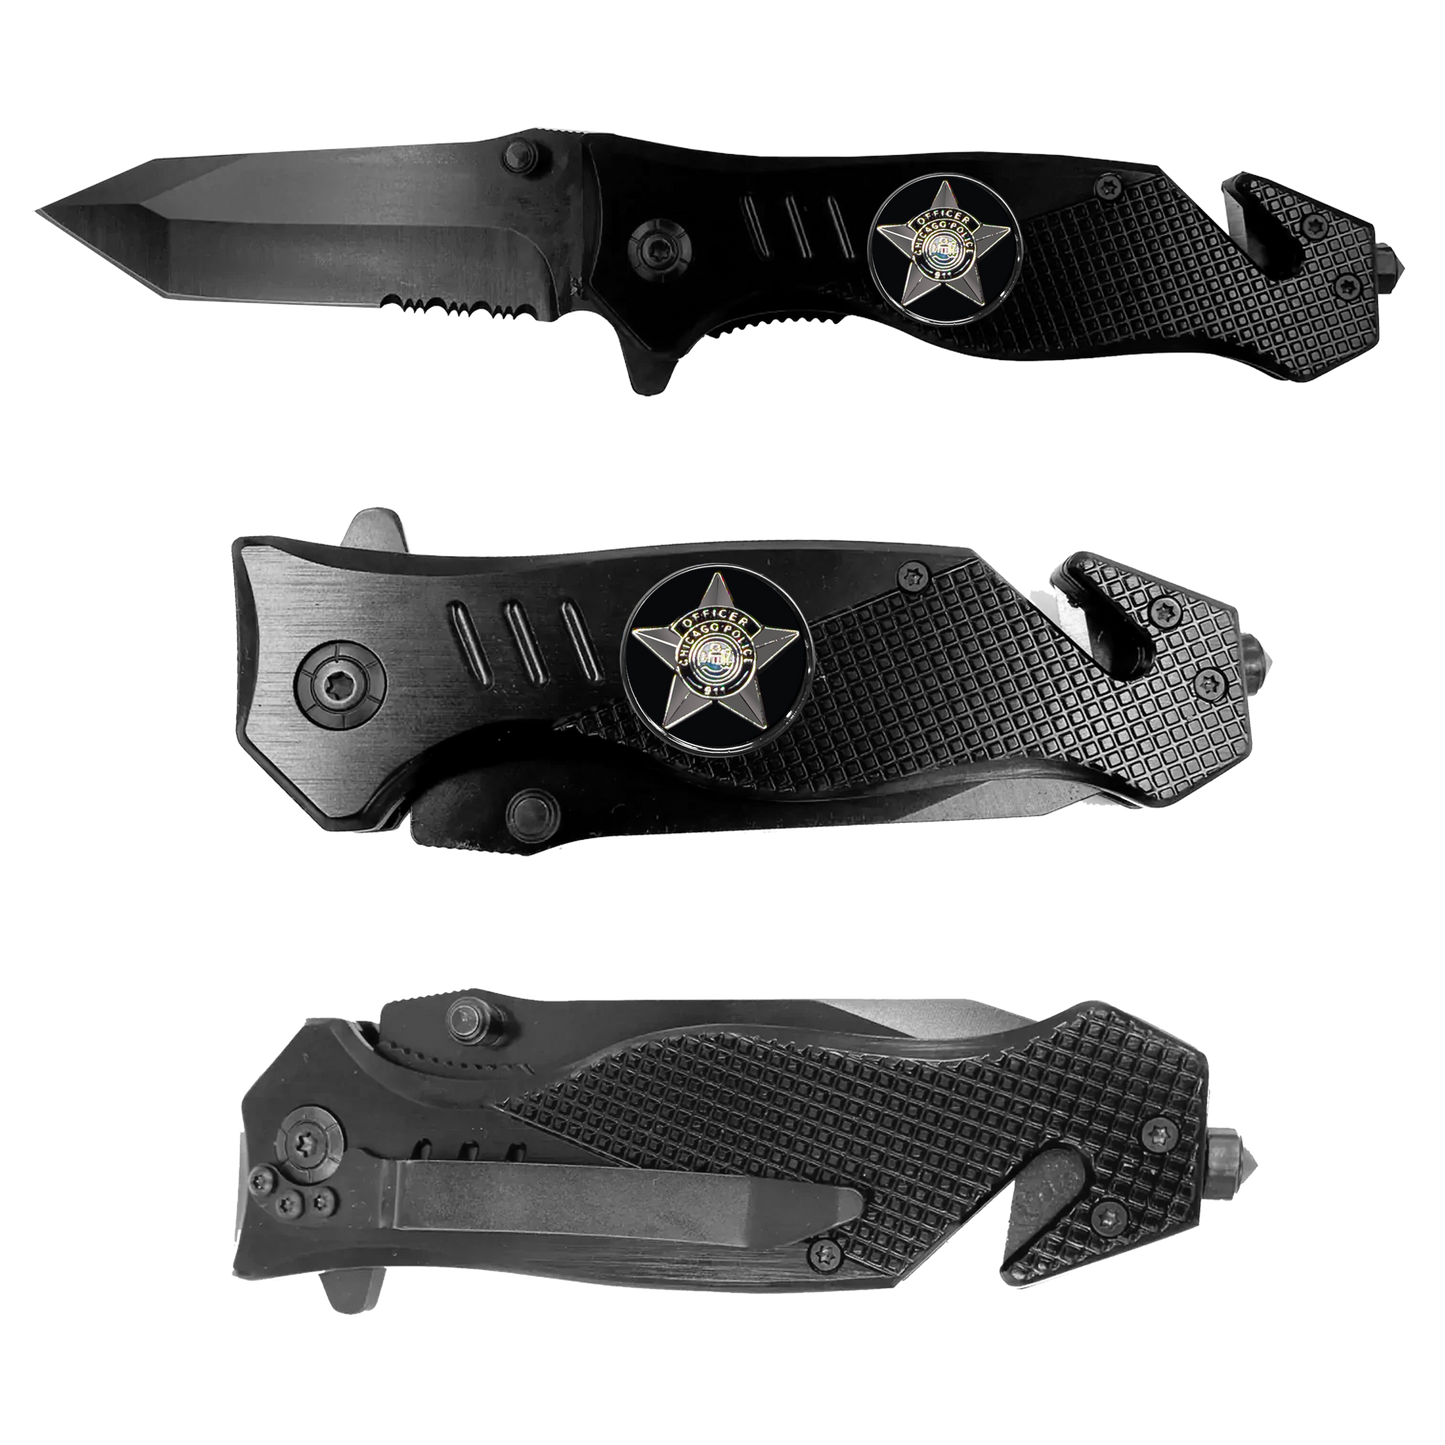 Chicago Police Department CPD 3-in-1 Tactical Rescue knife tool with Seatbelt Cutter, Steel Serrated Blade, Glass breaker